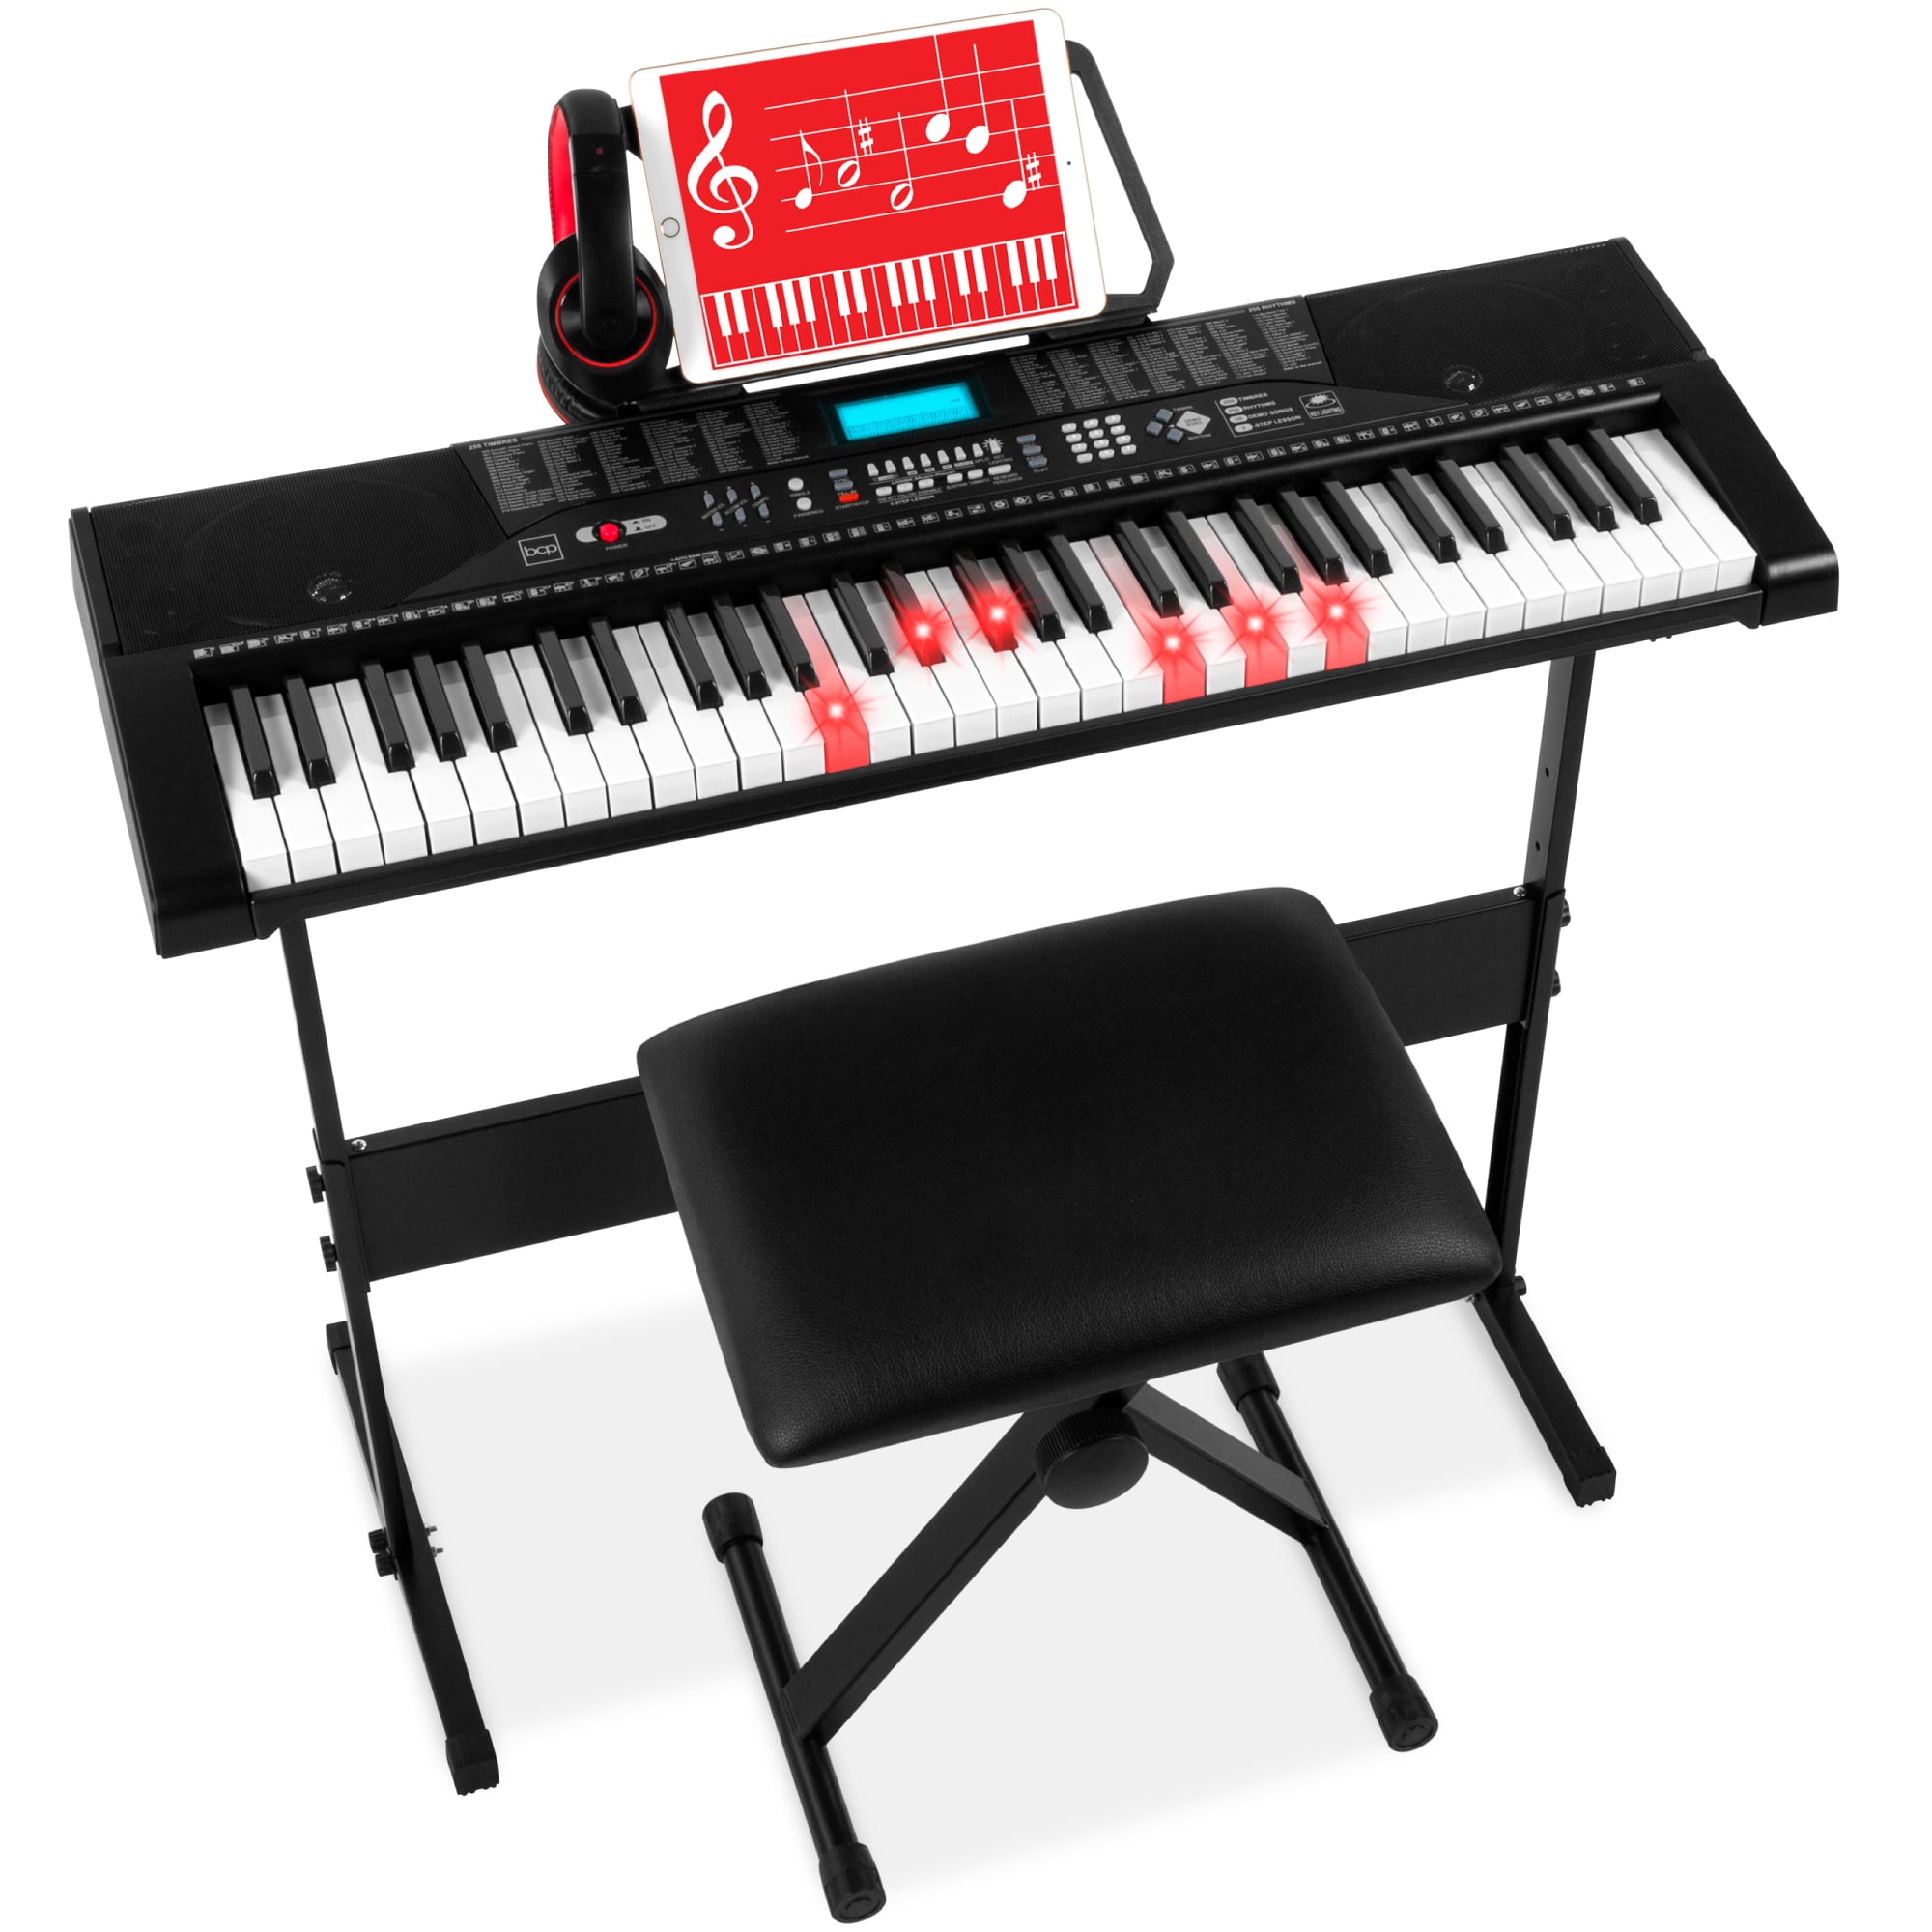 Super Home-Keyboard with 61 keys in the Great Saving Set with Stand and Headphones 